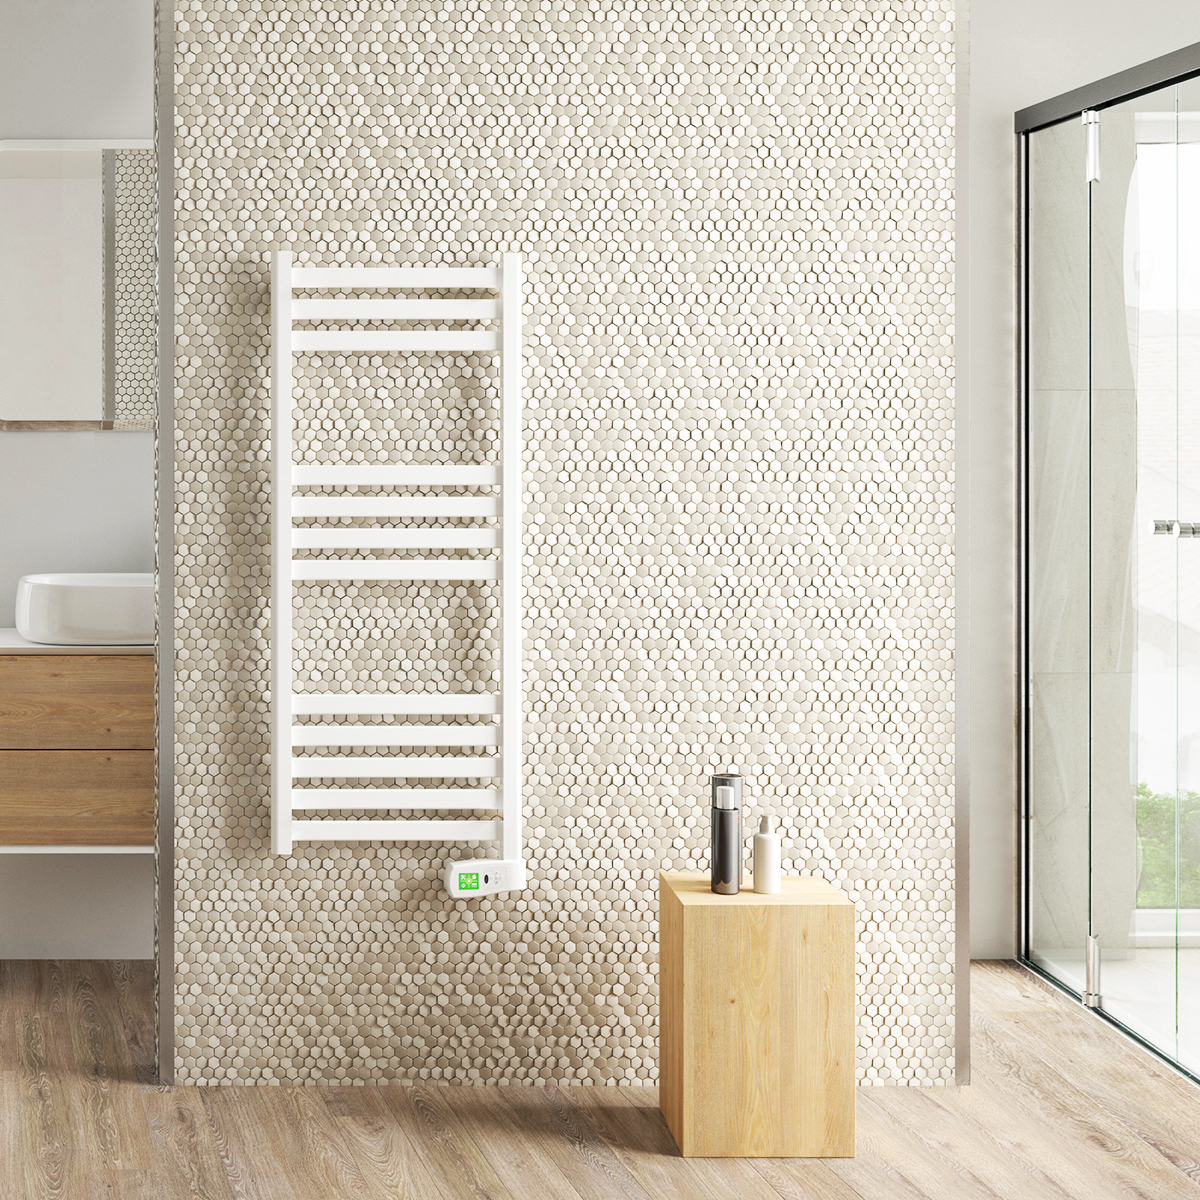 Rointe electric towel rails are easily wall mounted